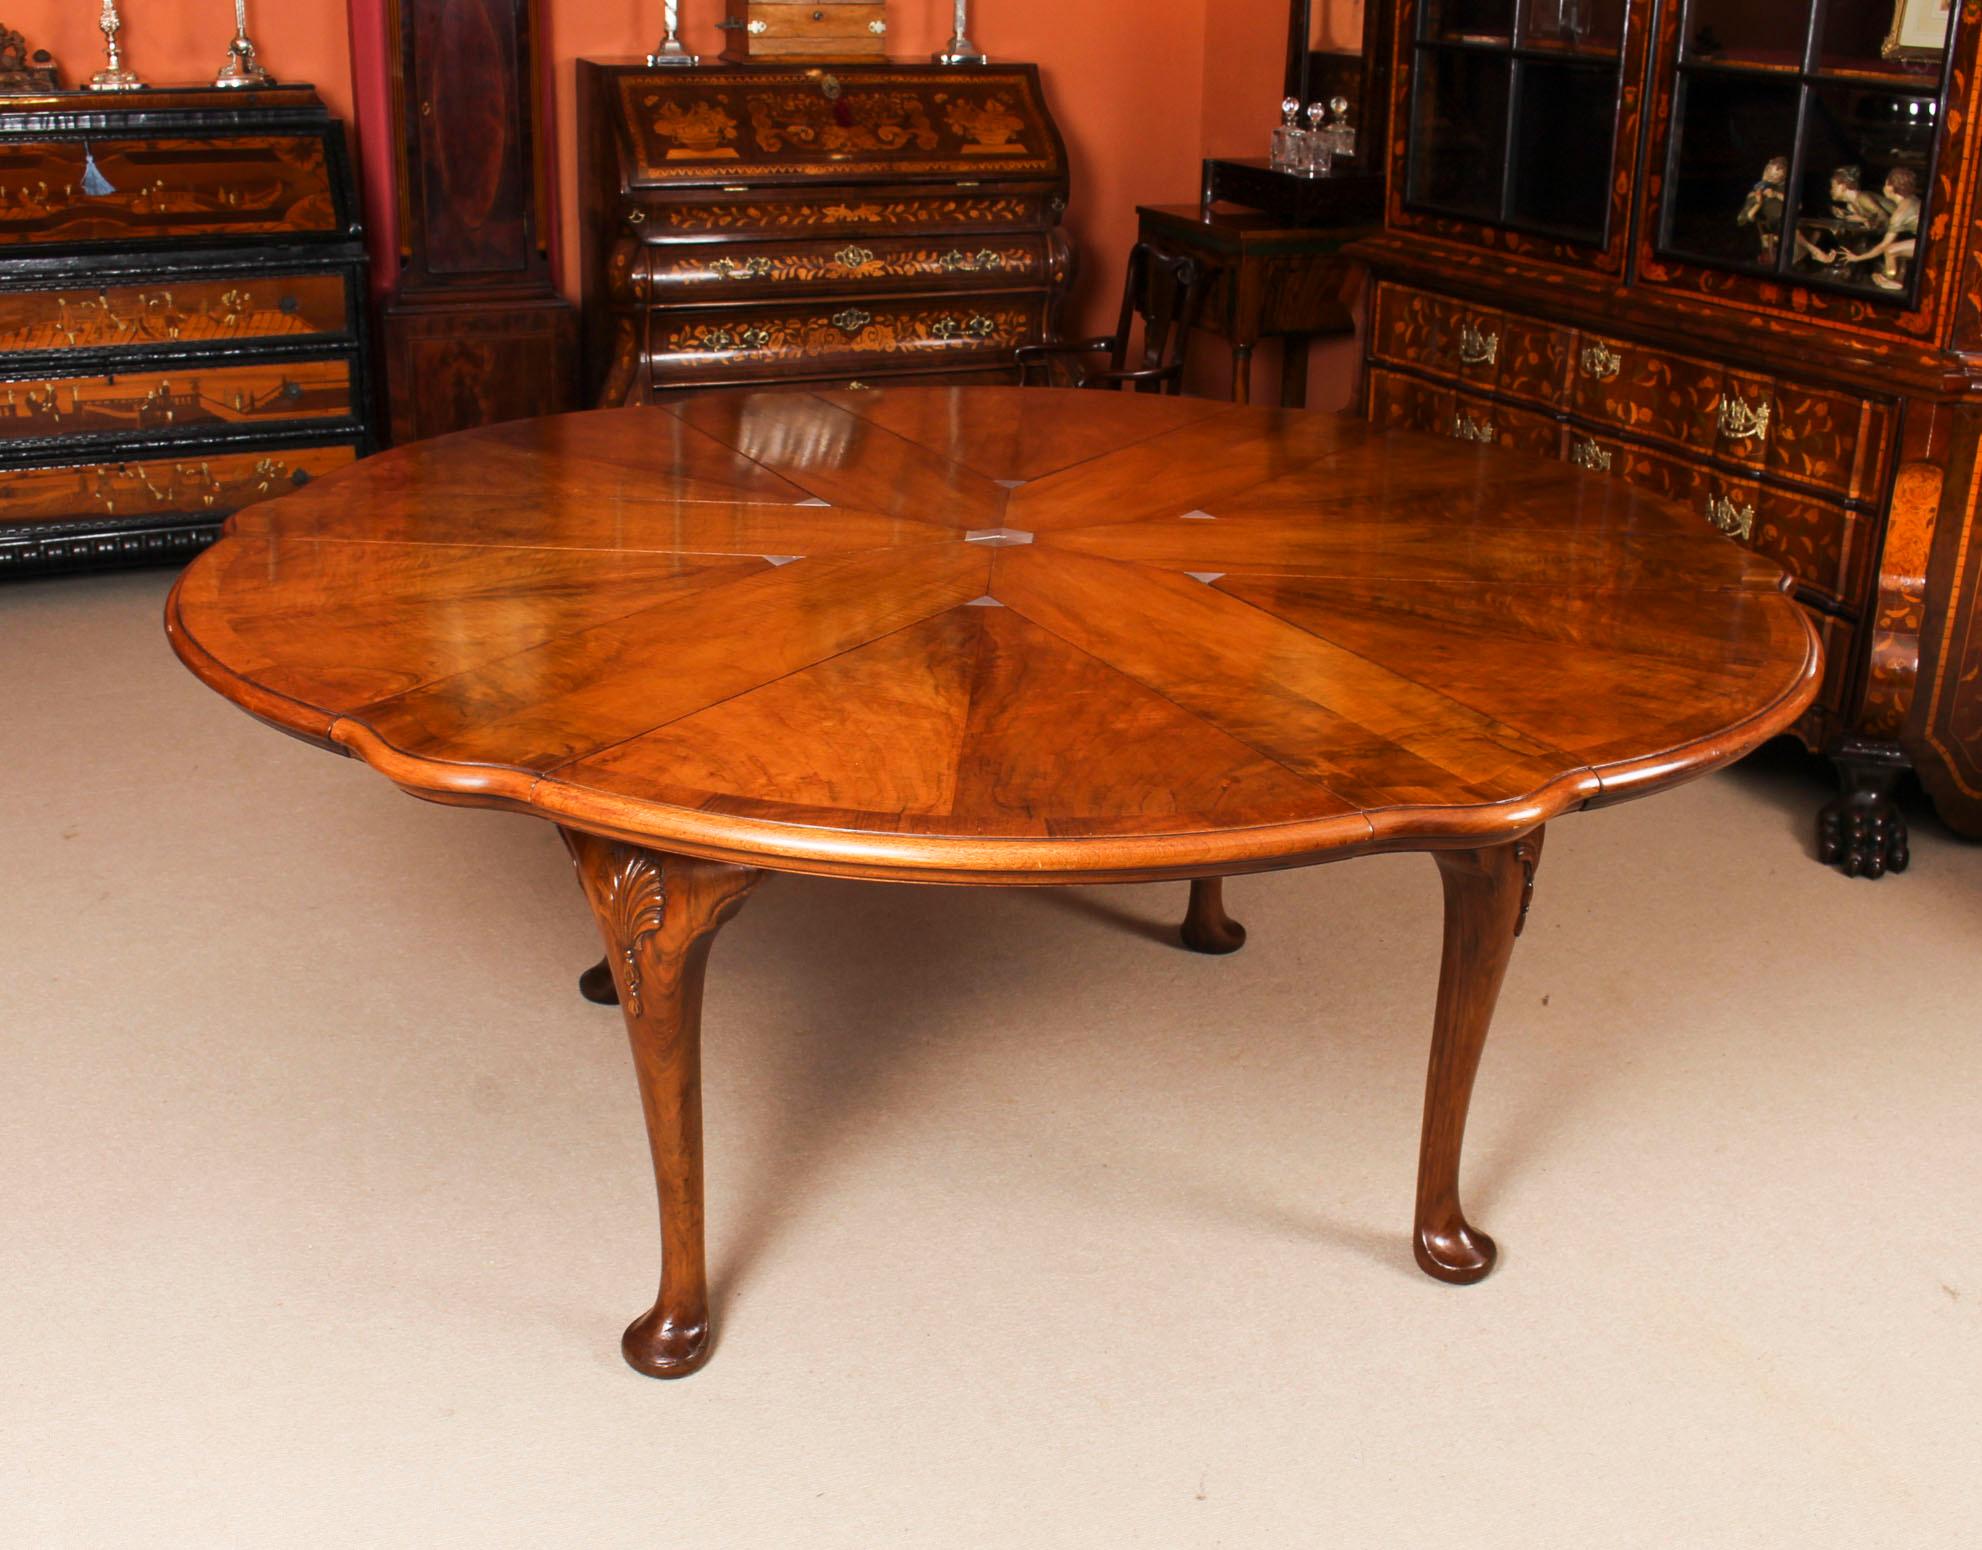 This is a important and rare Queen Anne revival walnut jupe action dining table by Gillows, with eight cabriole dining chairs, all dating from the late 19th century.

The amazing table features a shaped circular crossbanded top with a moulded